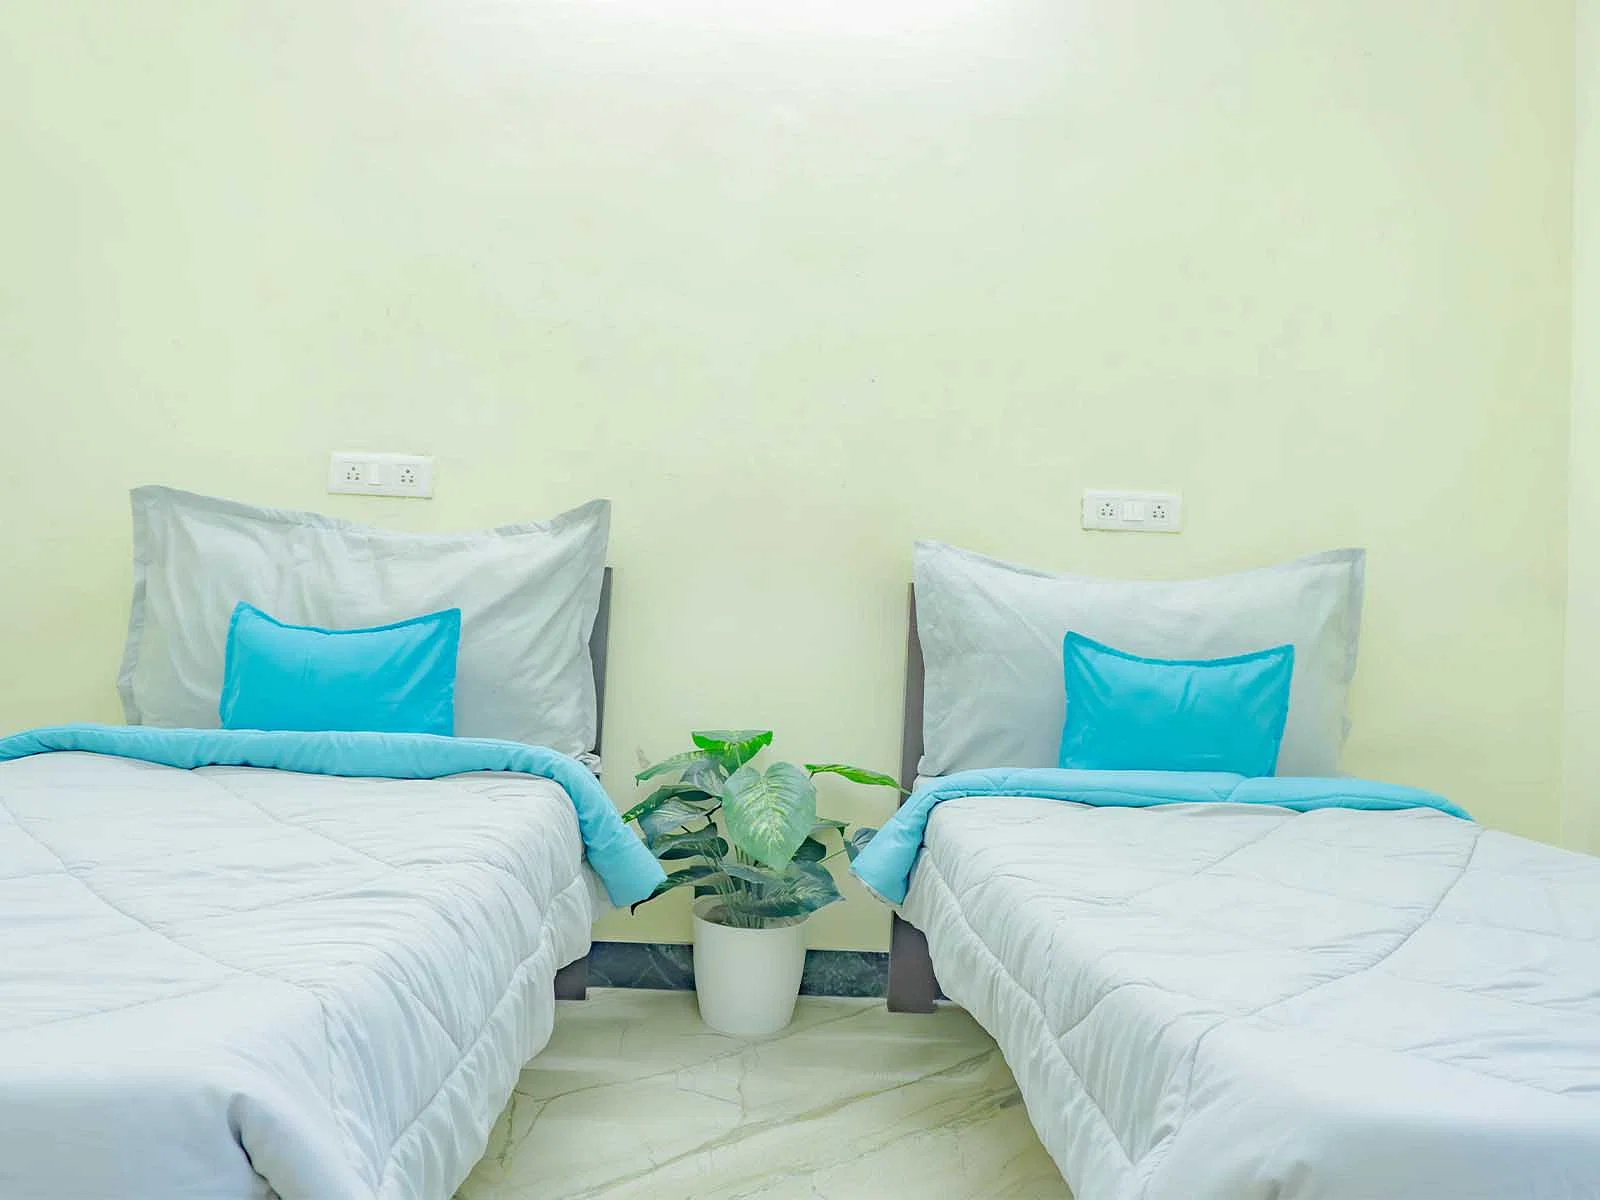 safe and affordable hostels for gents students with 24/7 security and CCTV surveillance-Zolo Nook